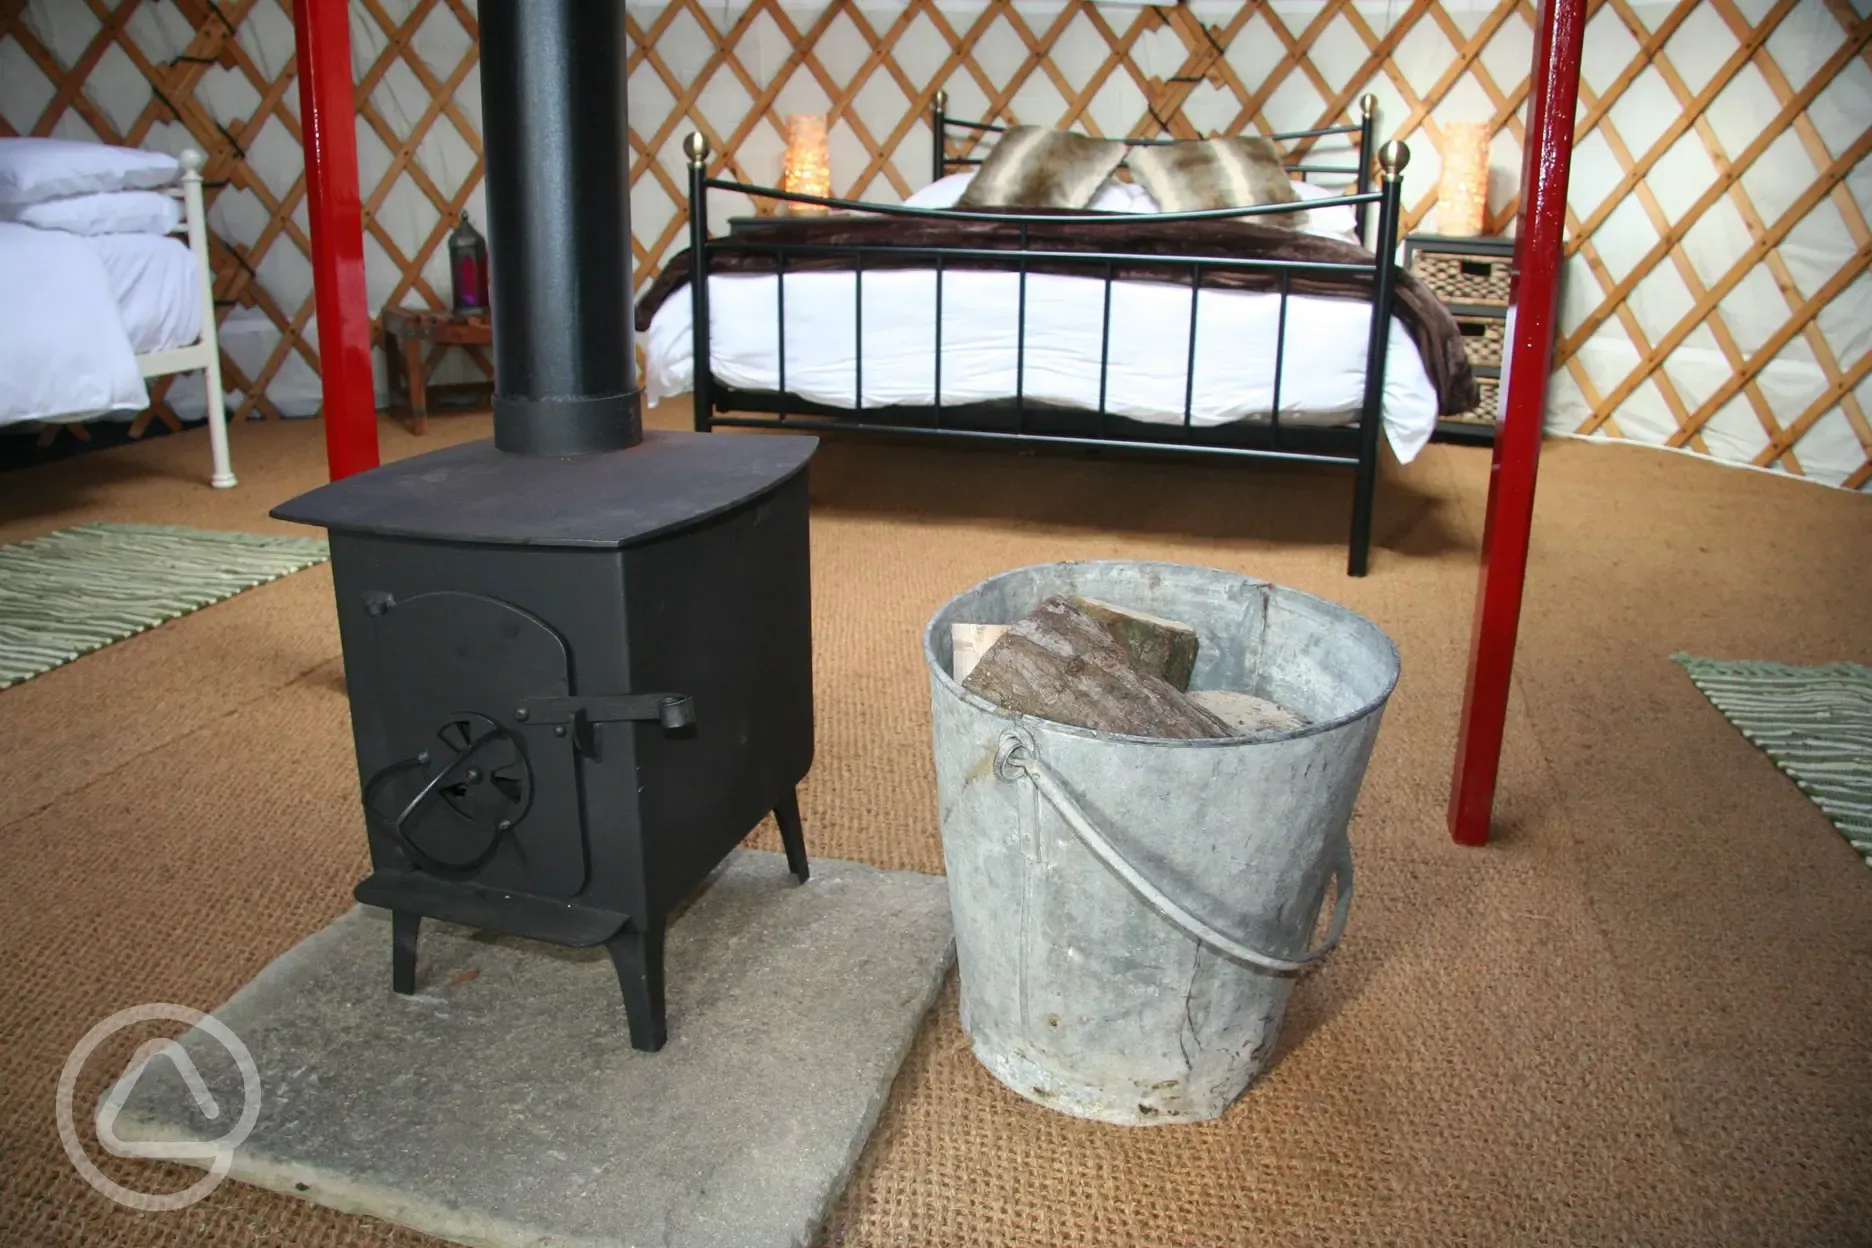 A wood burning stove with free wood keeps our yurts warm and cosy in all weathers